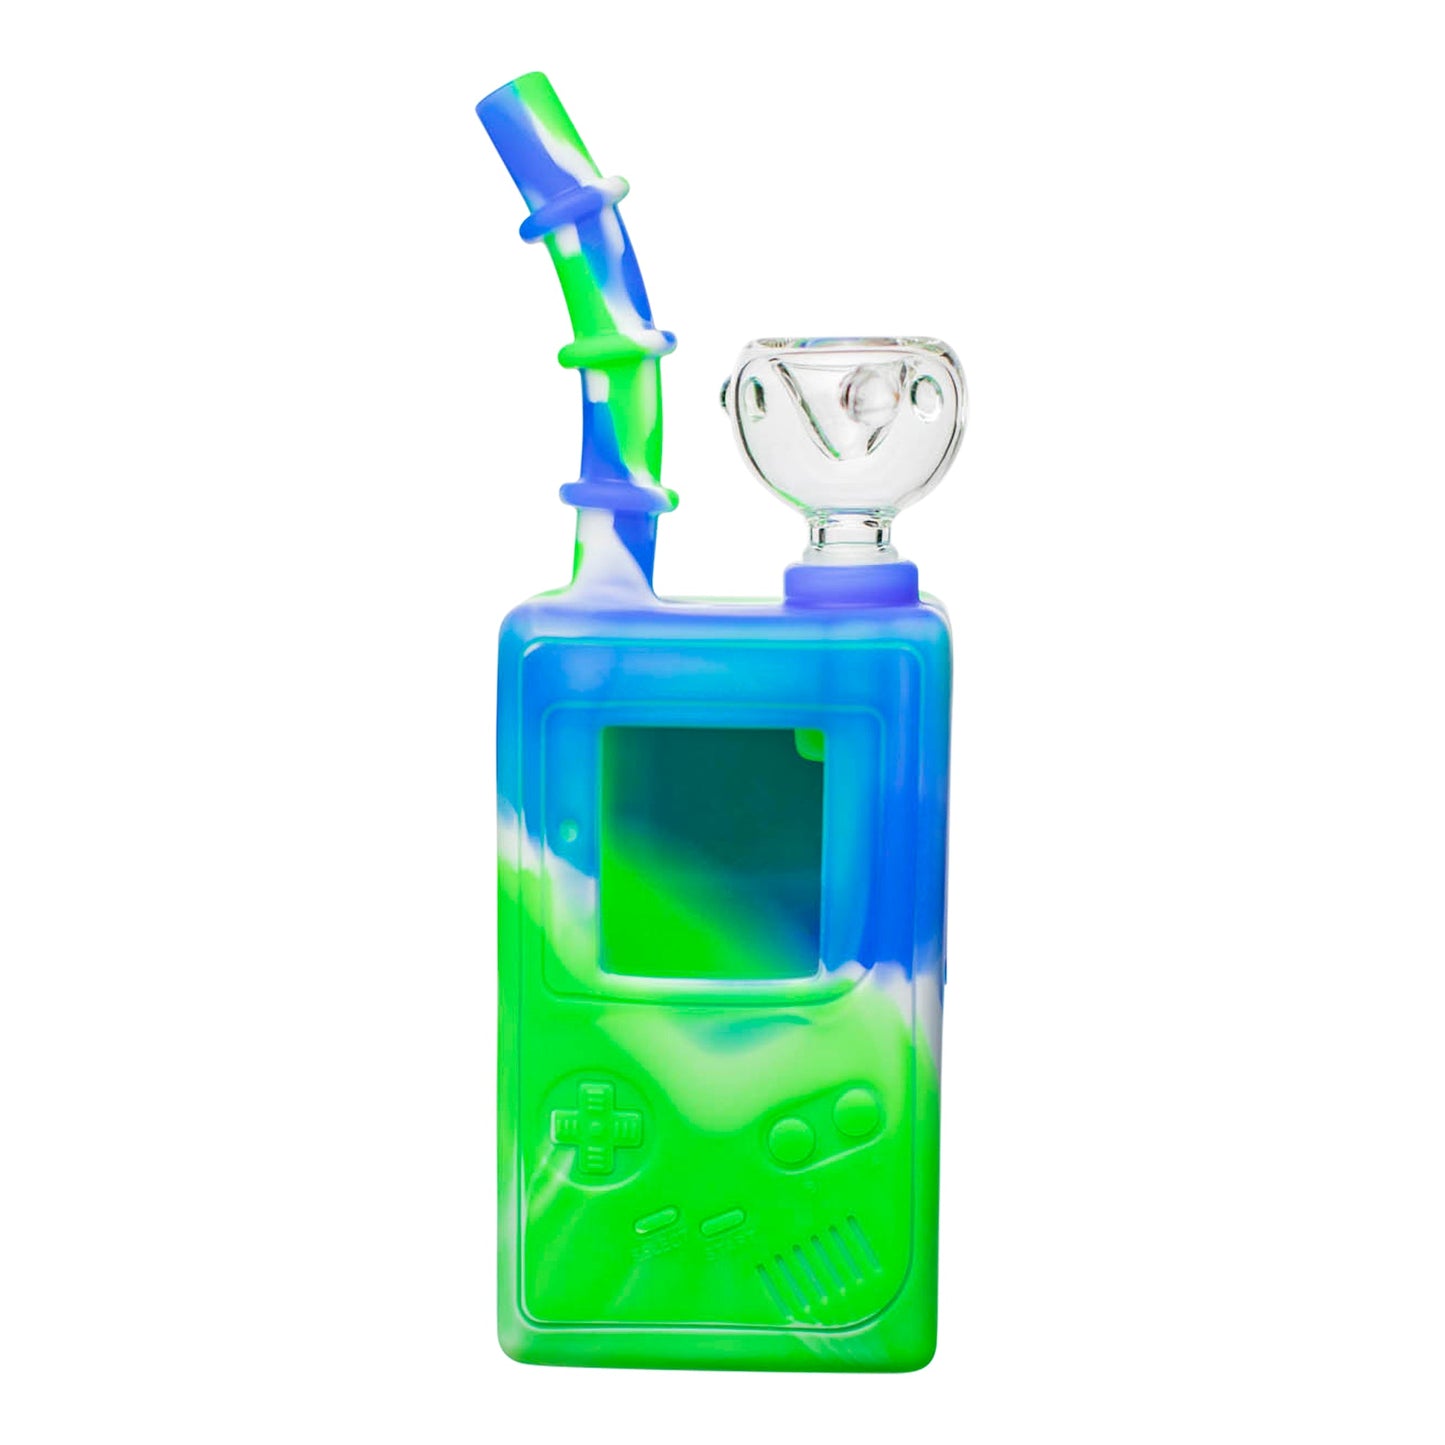 The Silicone GameBong - 7in Green/Blue